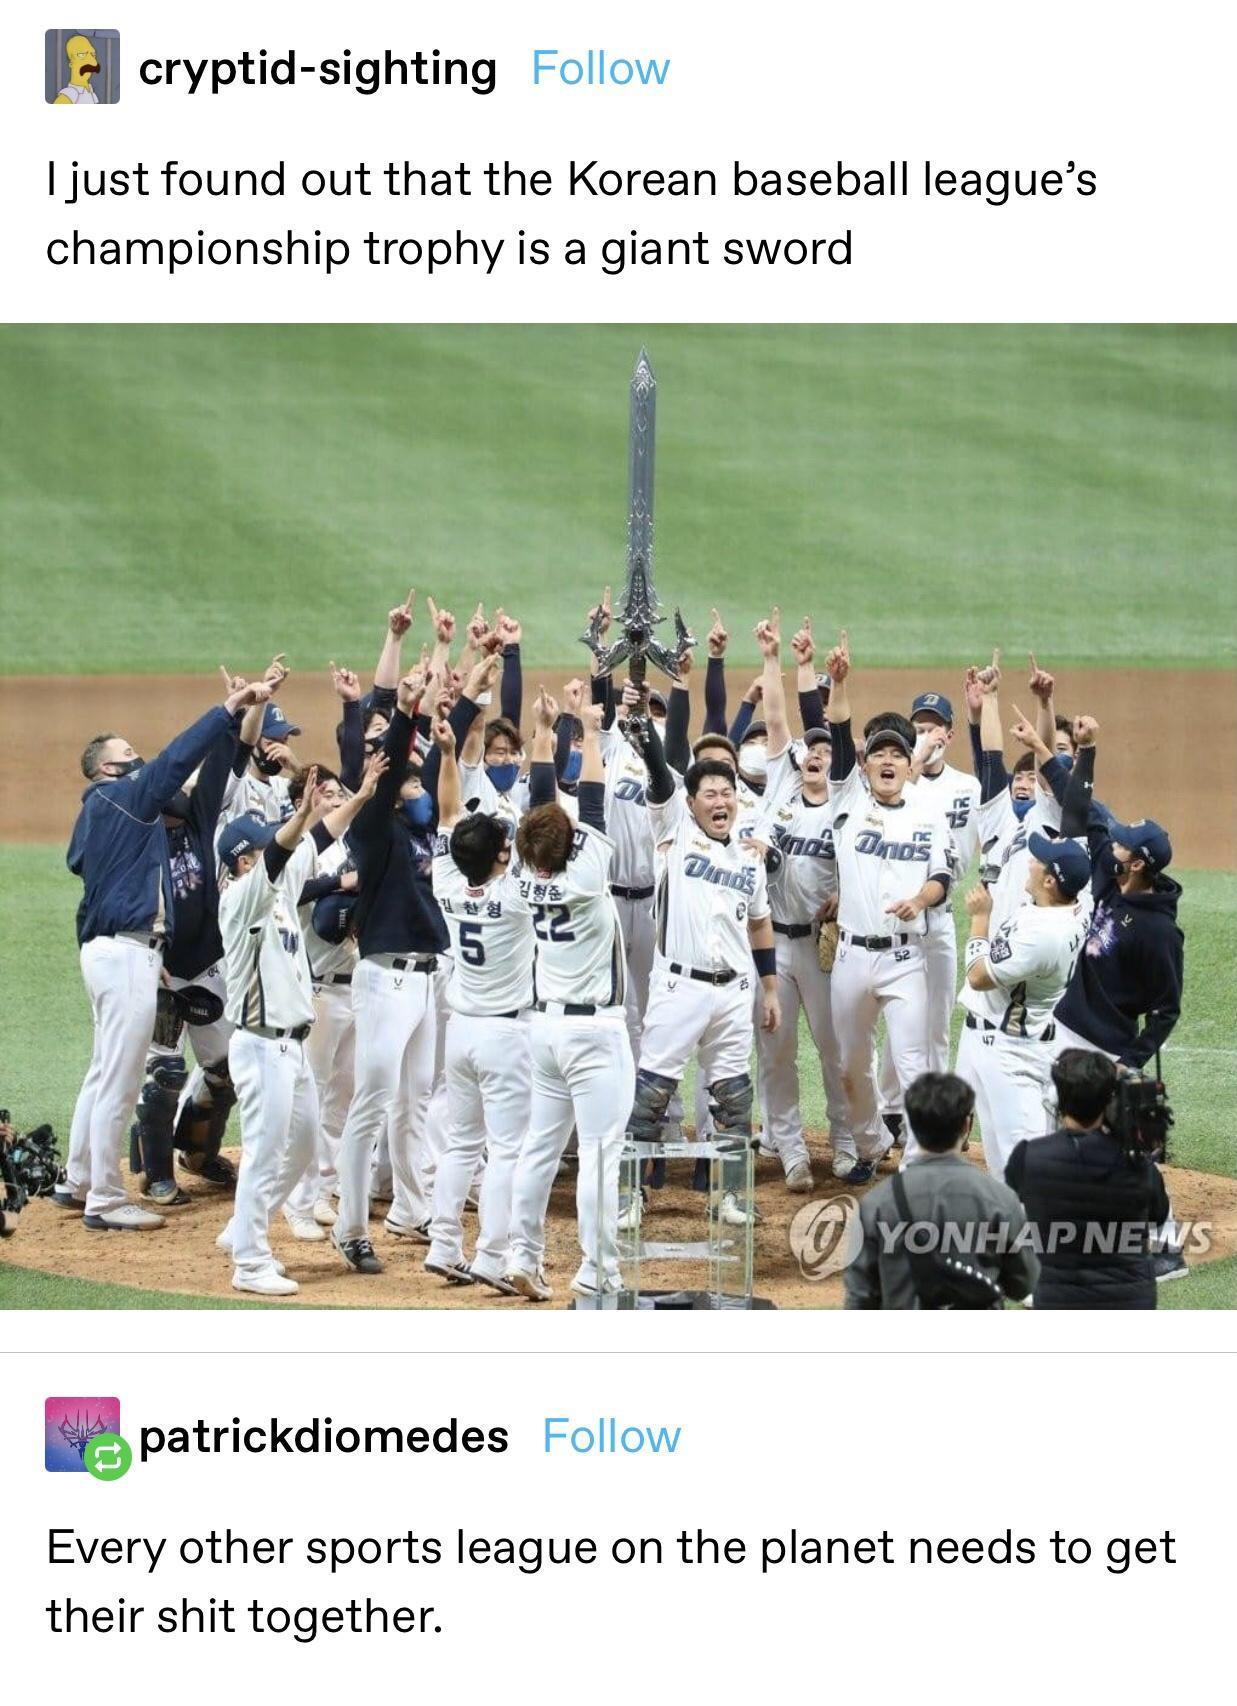 monday morning randomness - korean baseball trophy meme - cryptidsighting I just found out that the Korean baseball league's championship trophy is a giant sword 5 Dinos e and's Ord's 52 Yonhap News patrickdiomedes Every other sports league on the planet 